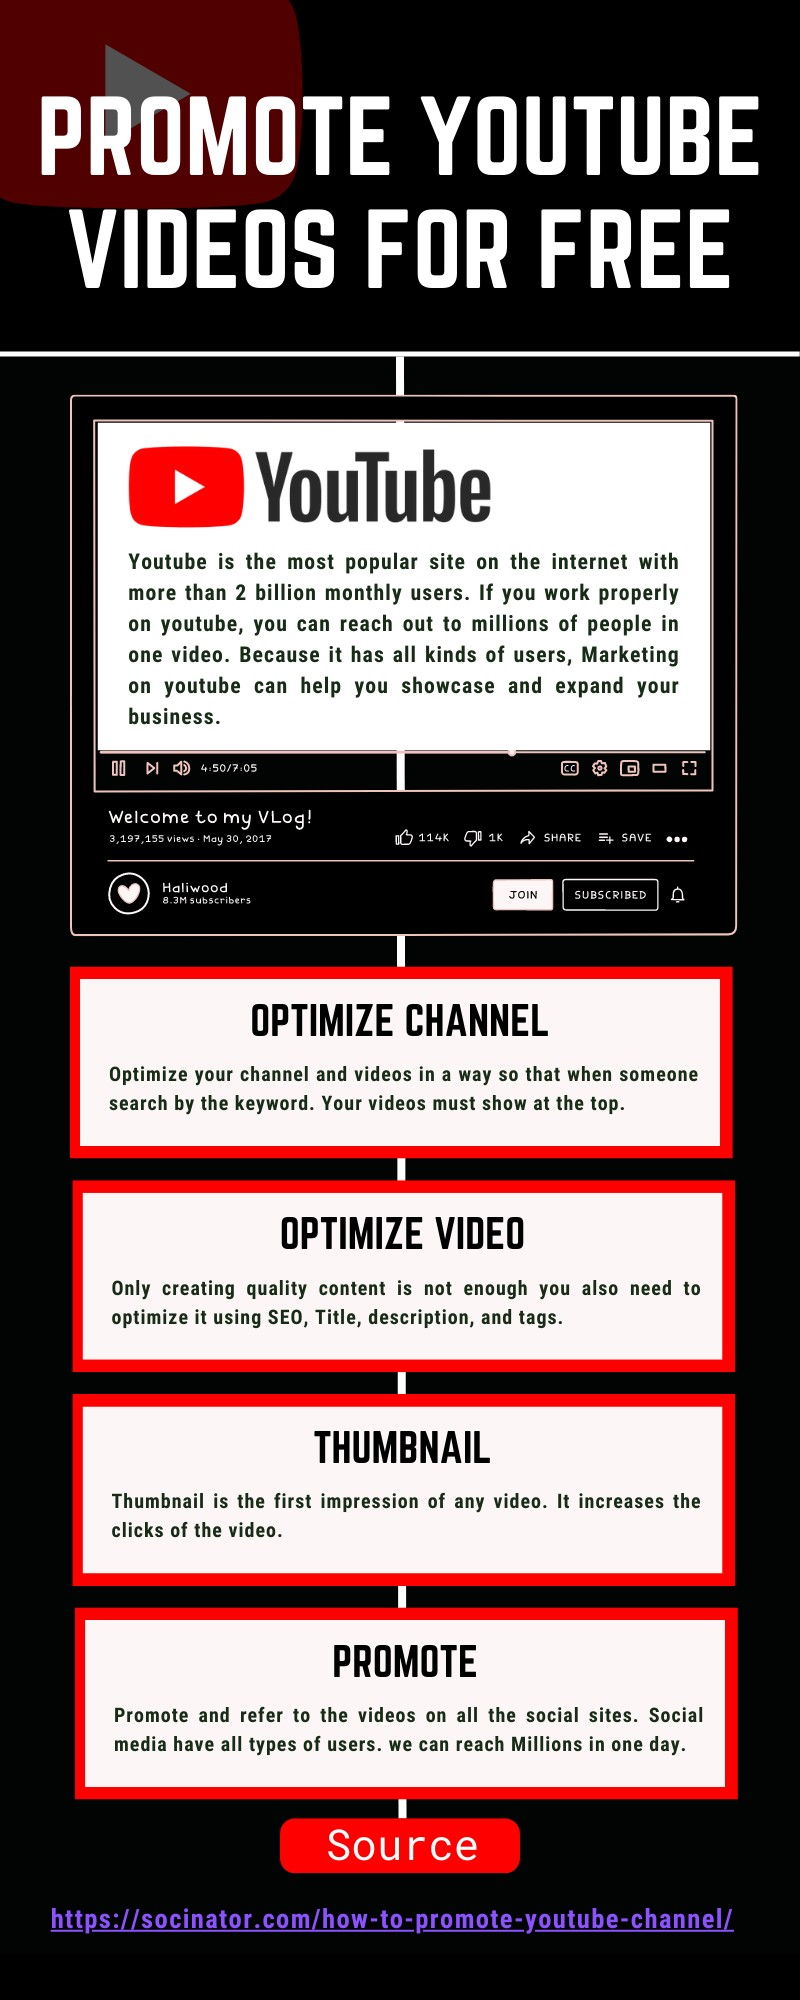 Promote YouTube Videos for free